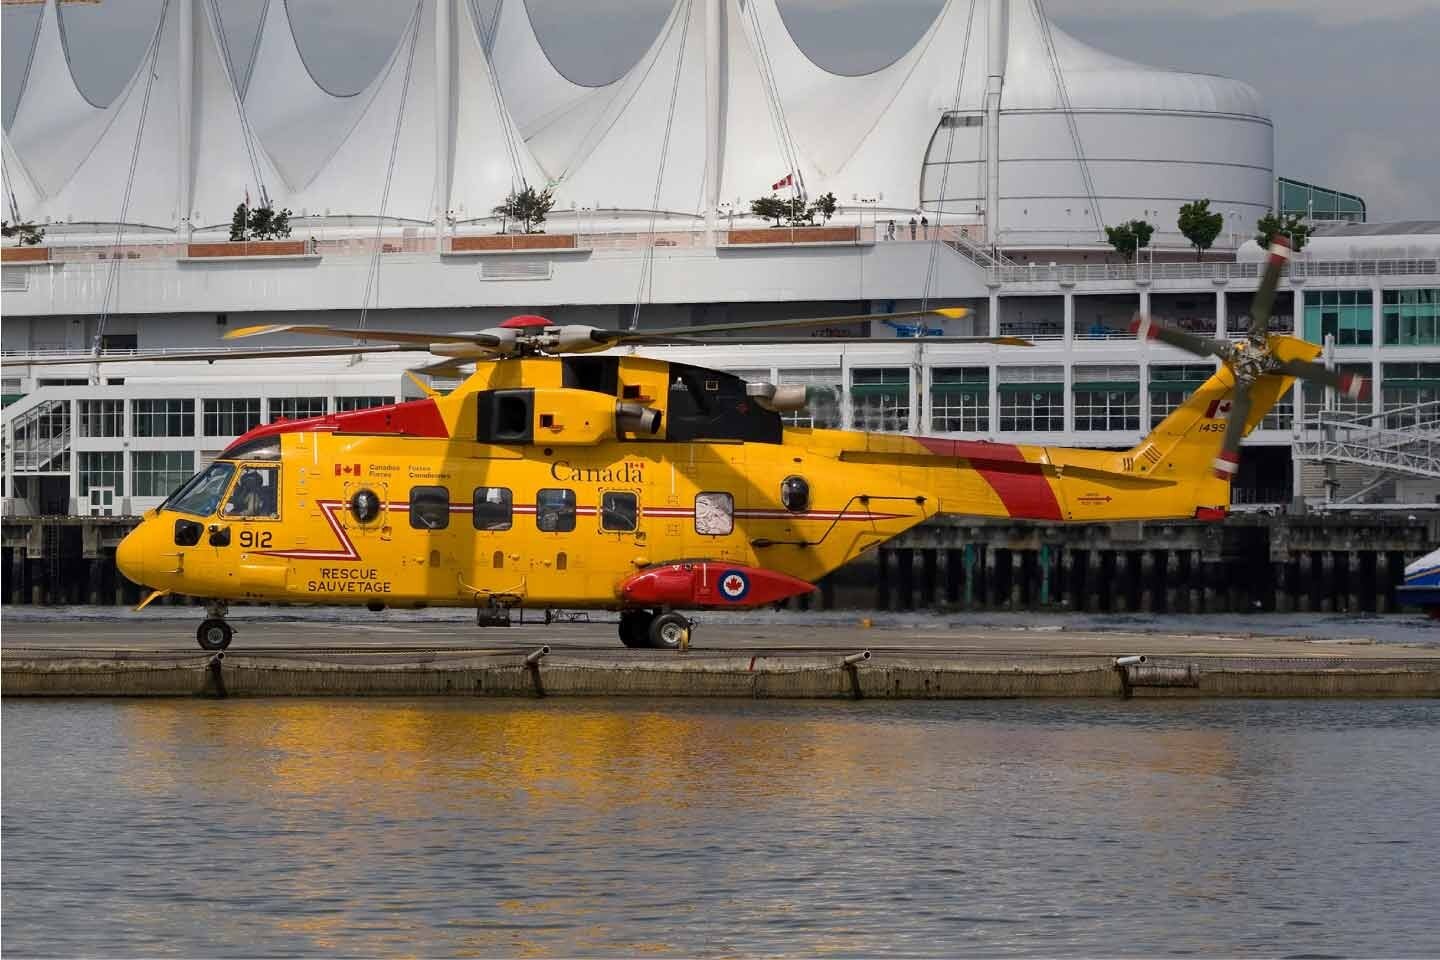 Canadian search and rescue helicopter in Vancouver Harbour